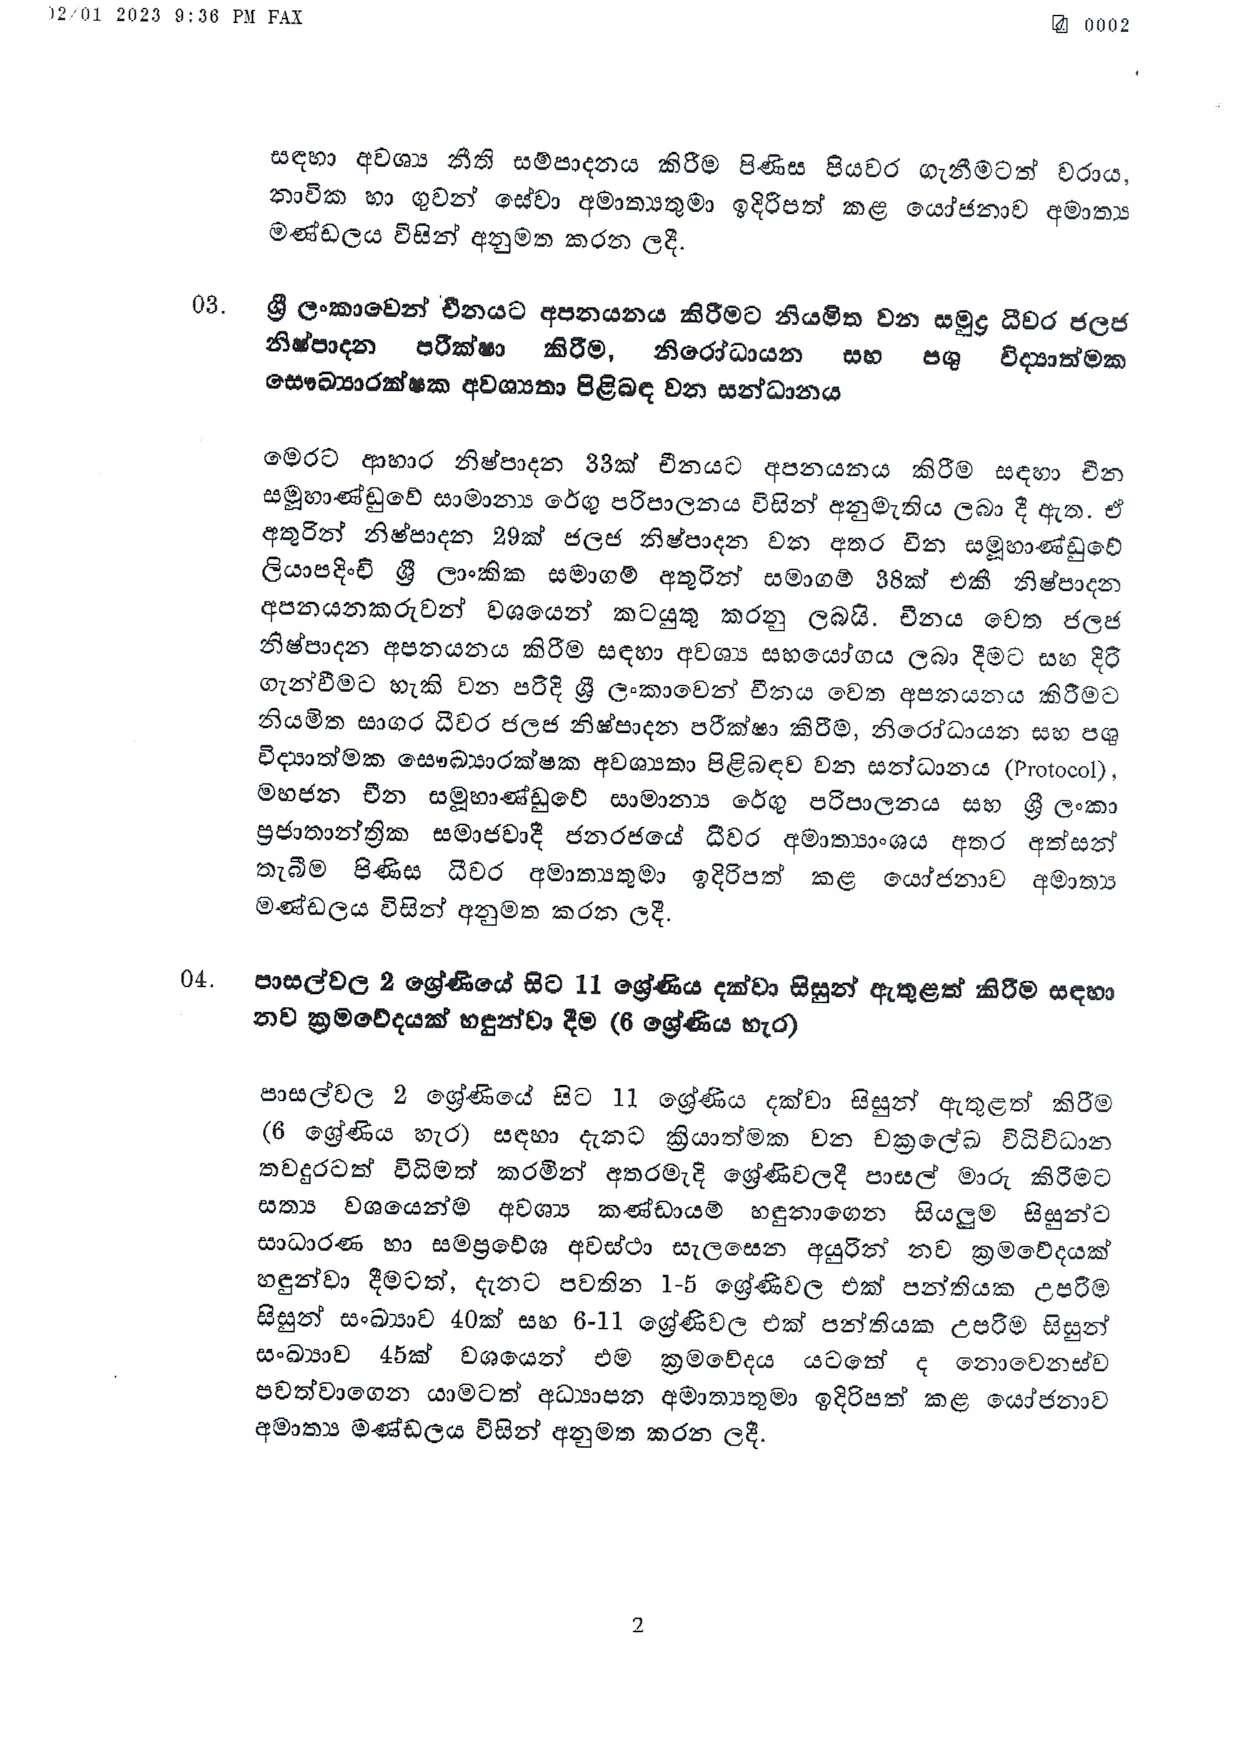 Cabinet Decision on 02.01.2023 page 002